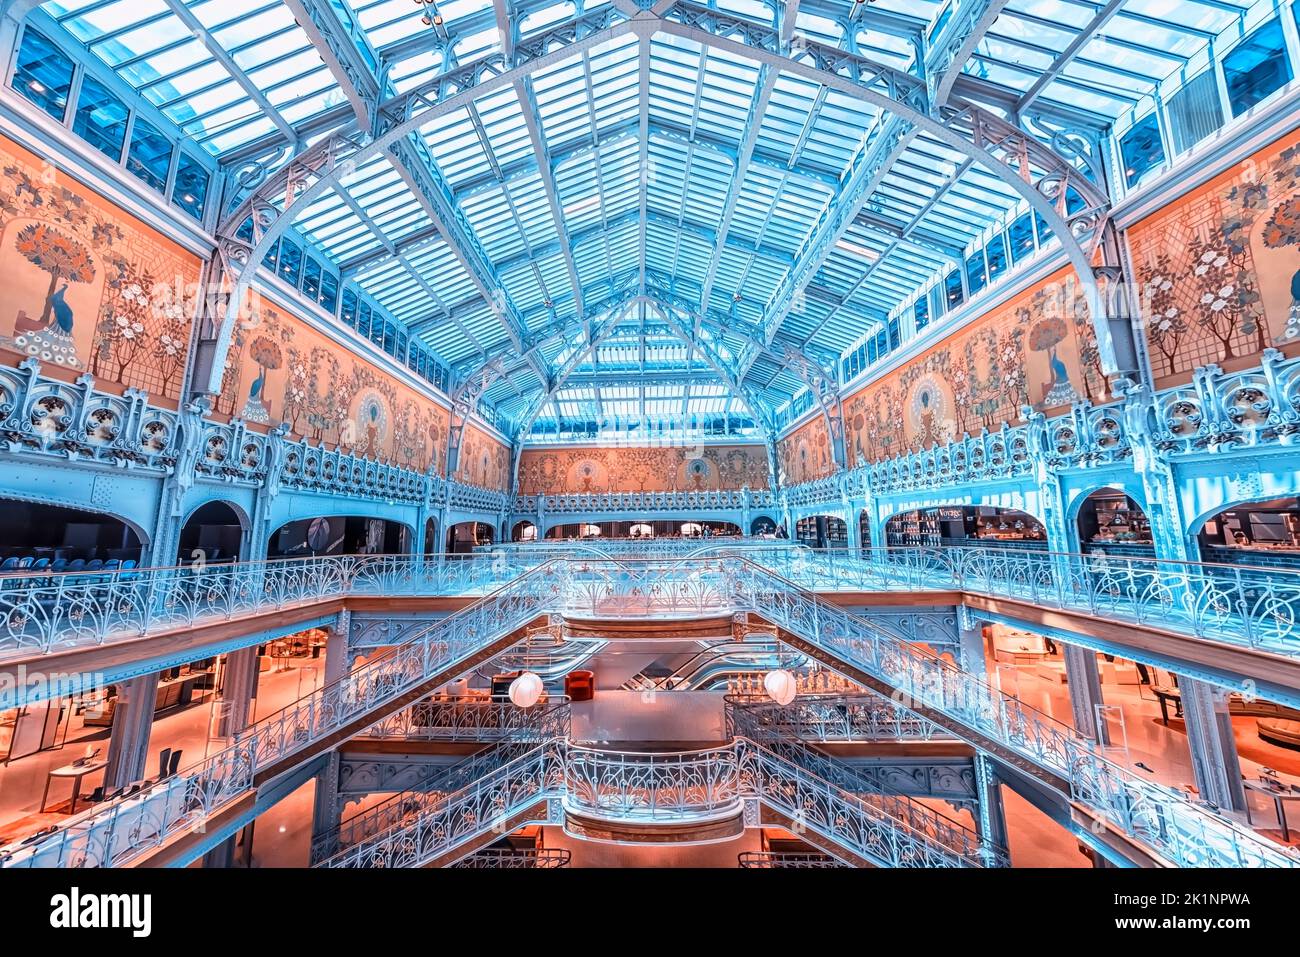 Inside the Samaritaine shopping mall in Paris city Stock Photo